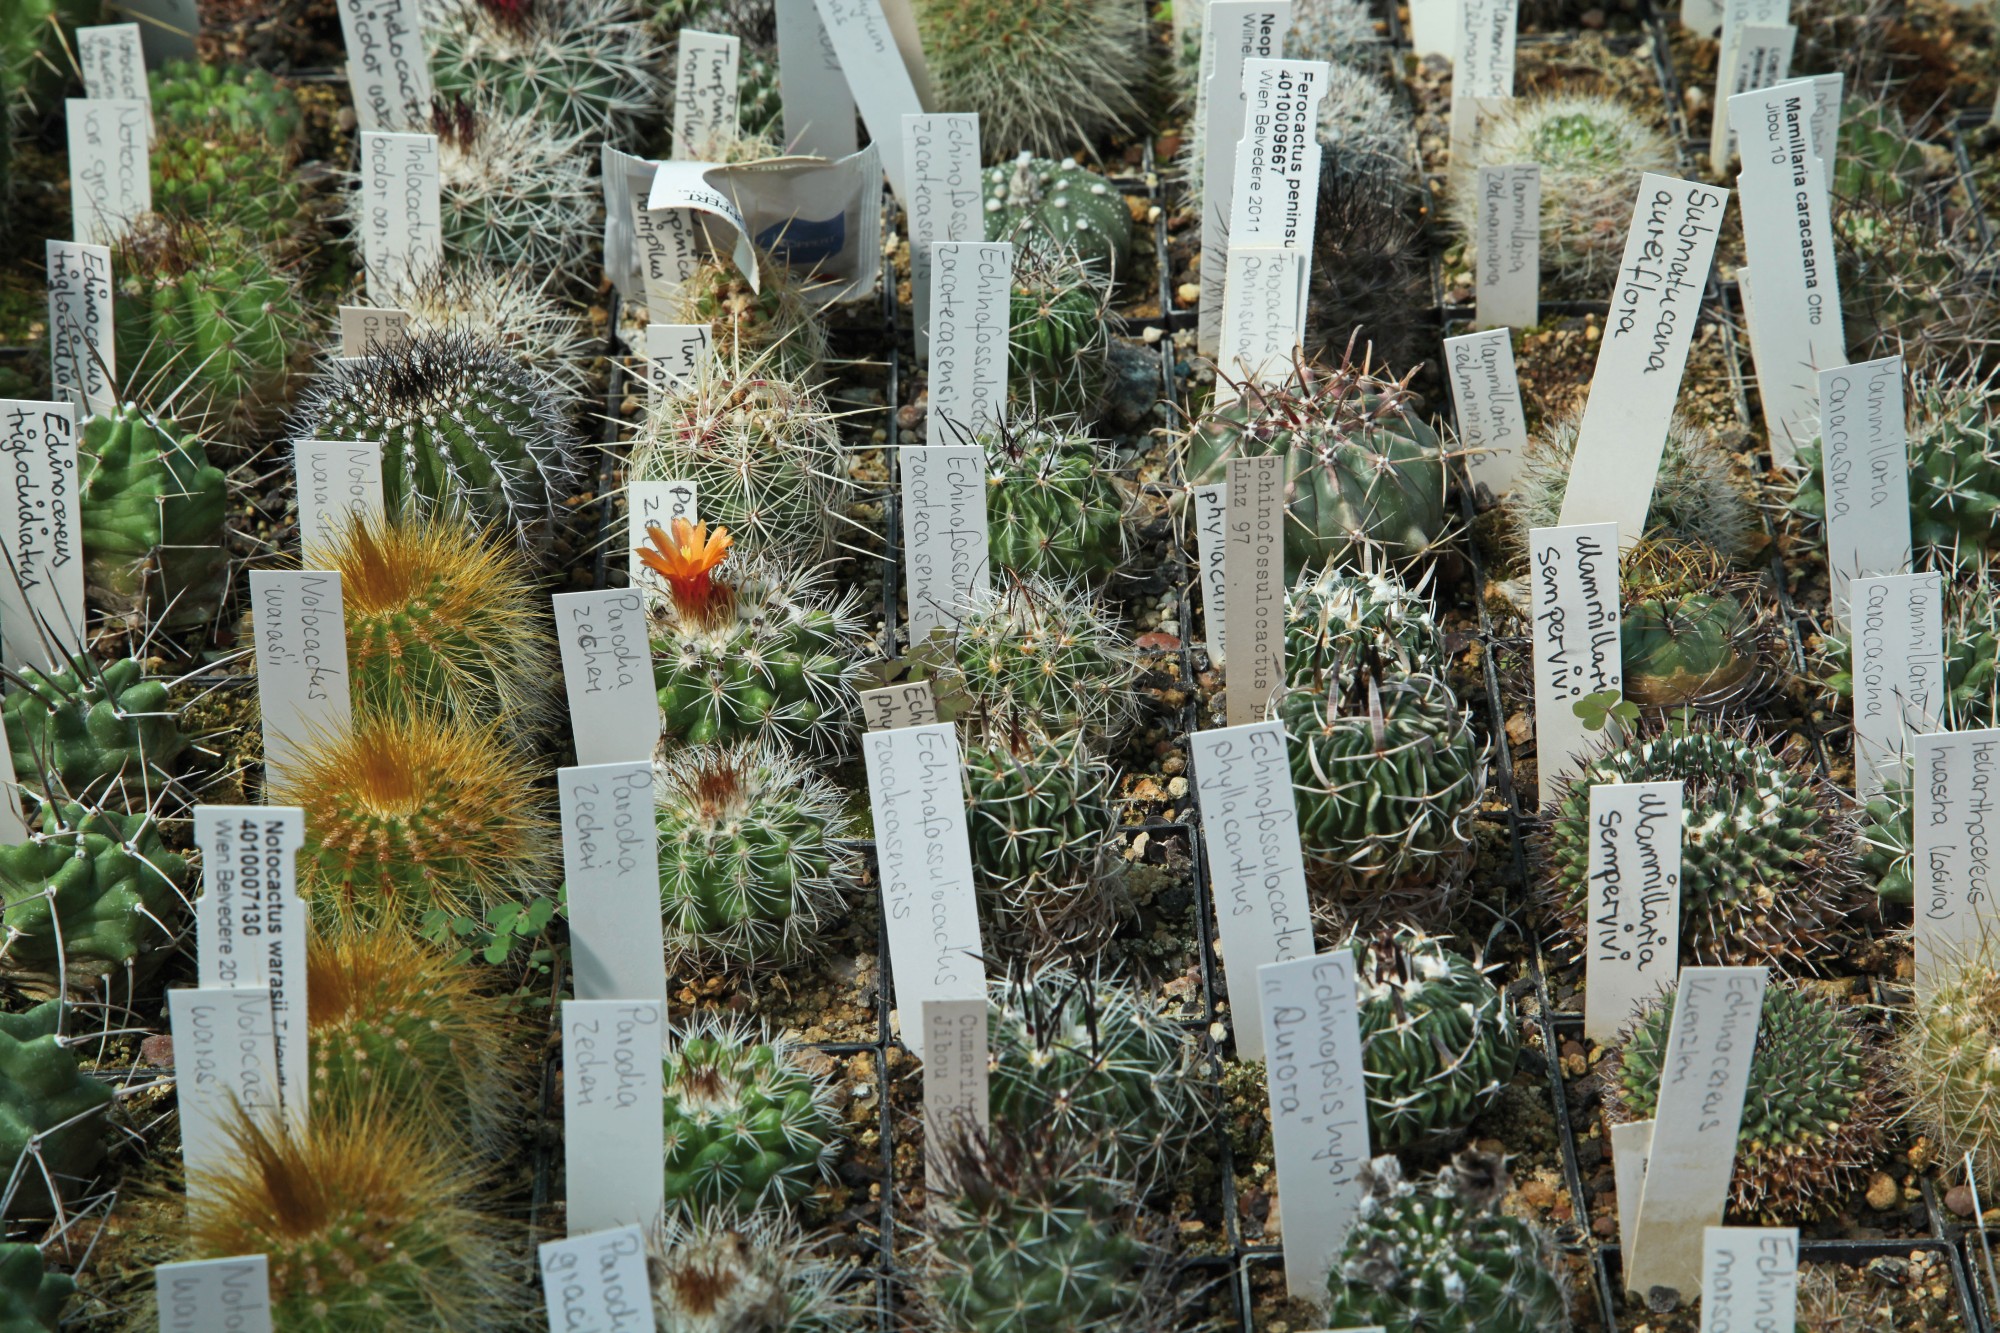 Cactus collection in the Botanical Garden (Image: Georg Pöhlein)